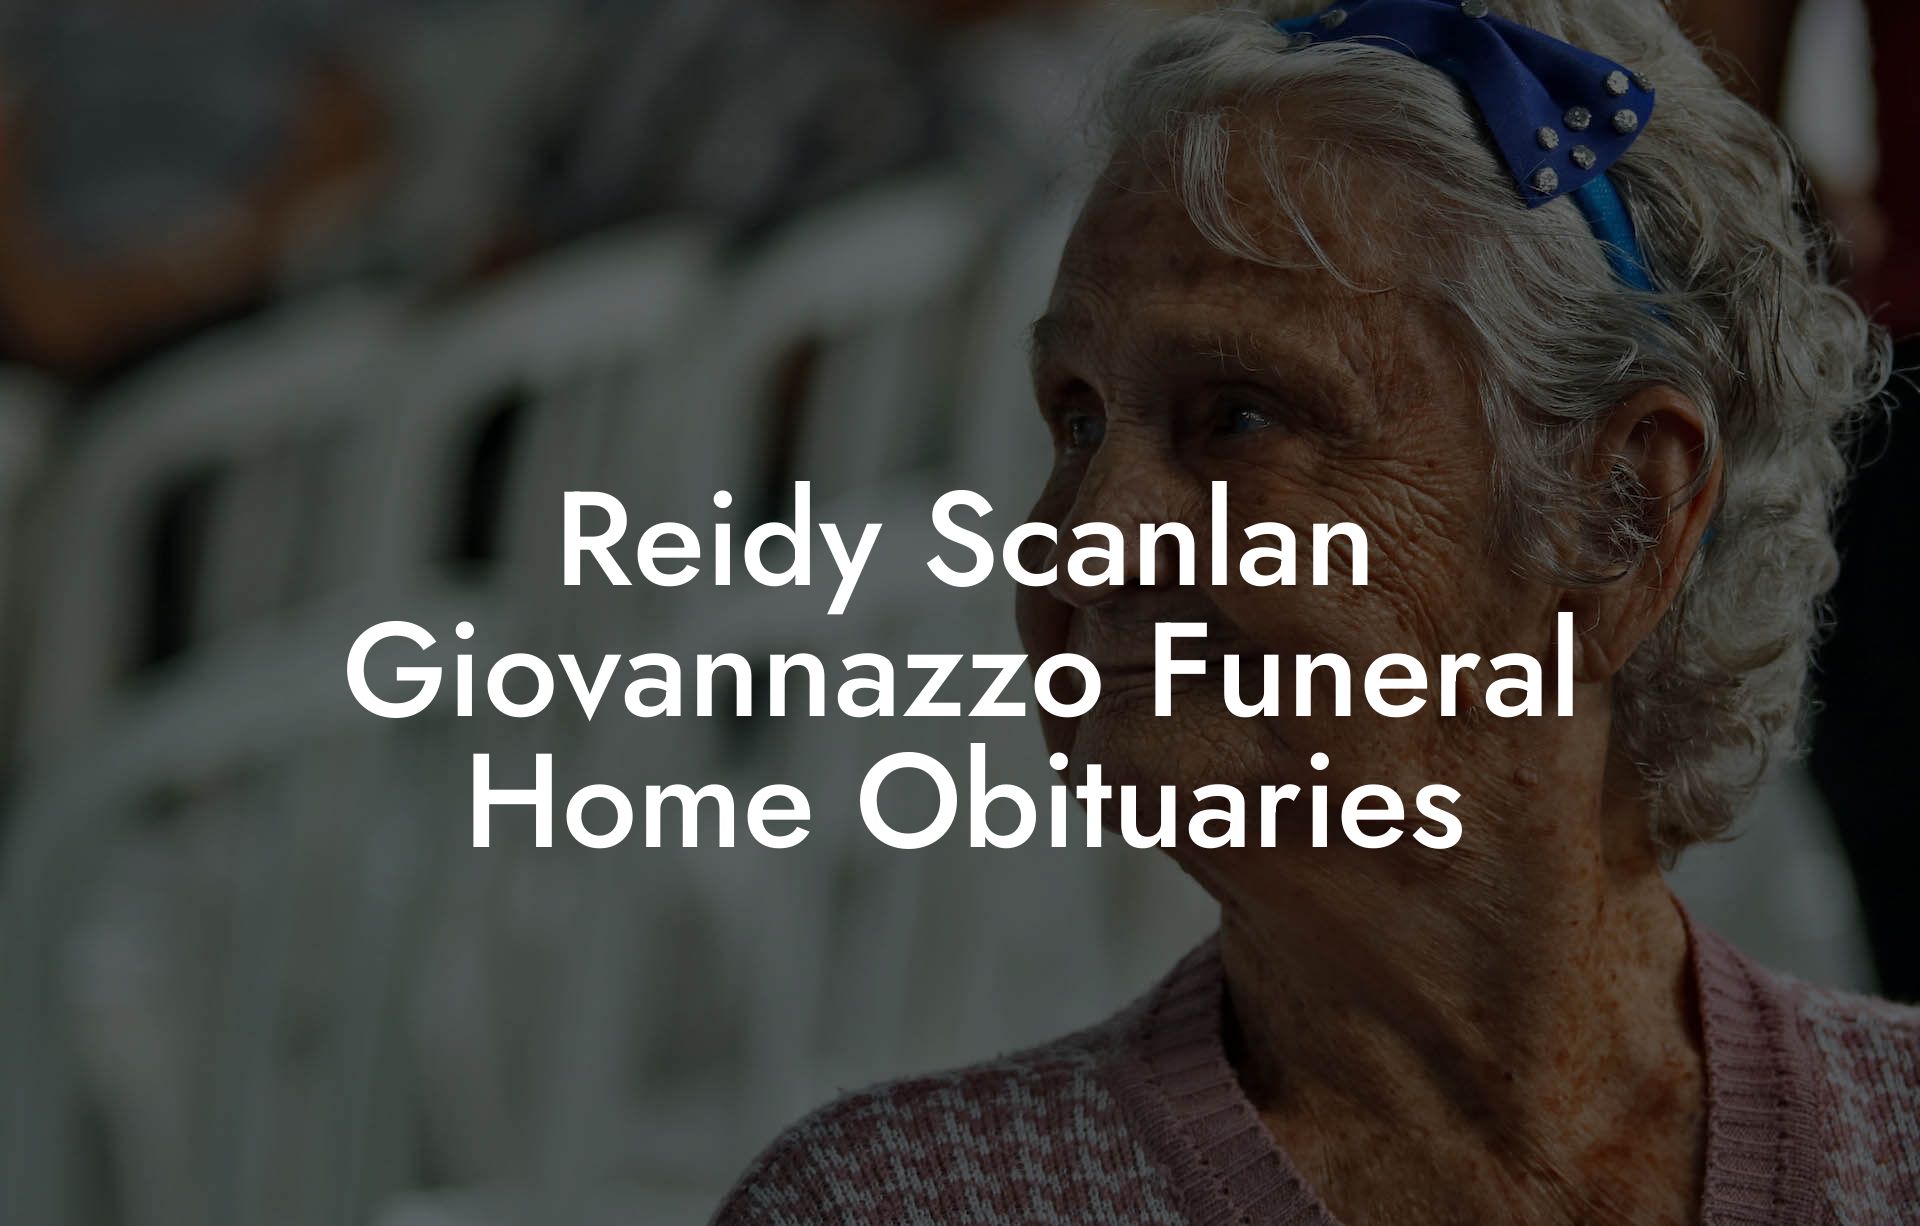 Reidy Scanlan Giovannazzo Funeral Home Obituaries